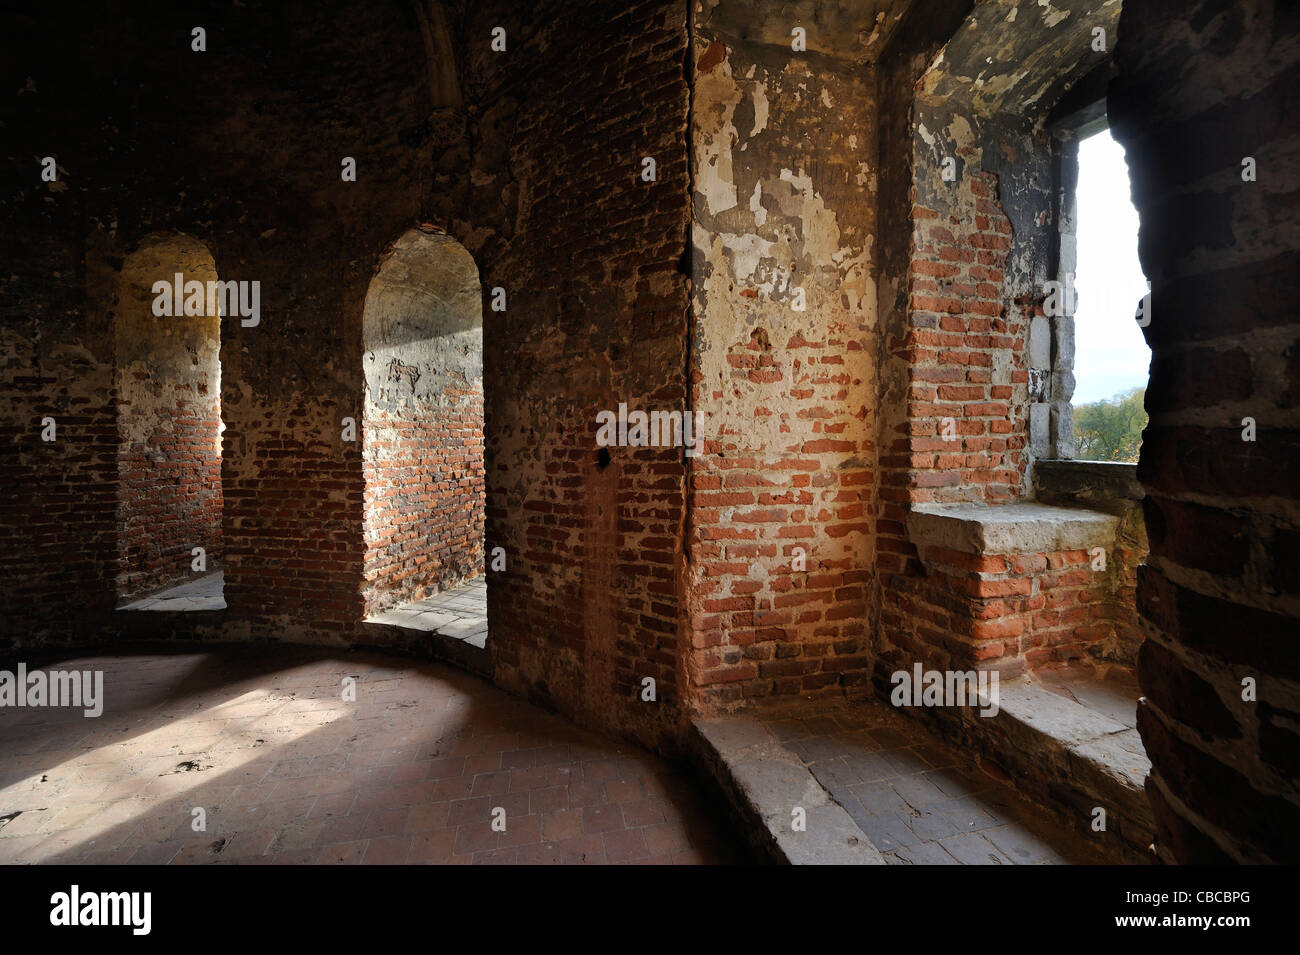 Room with stone window seat in recess inside medieval Beersel Castle, Belgium Stock Photo